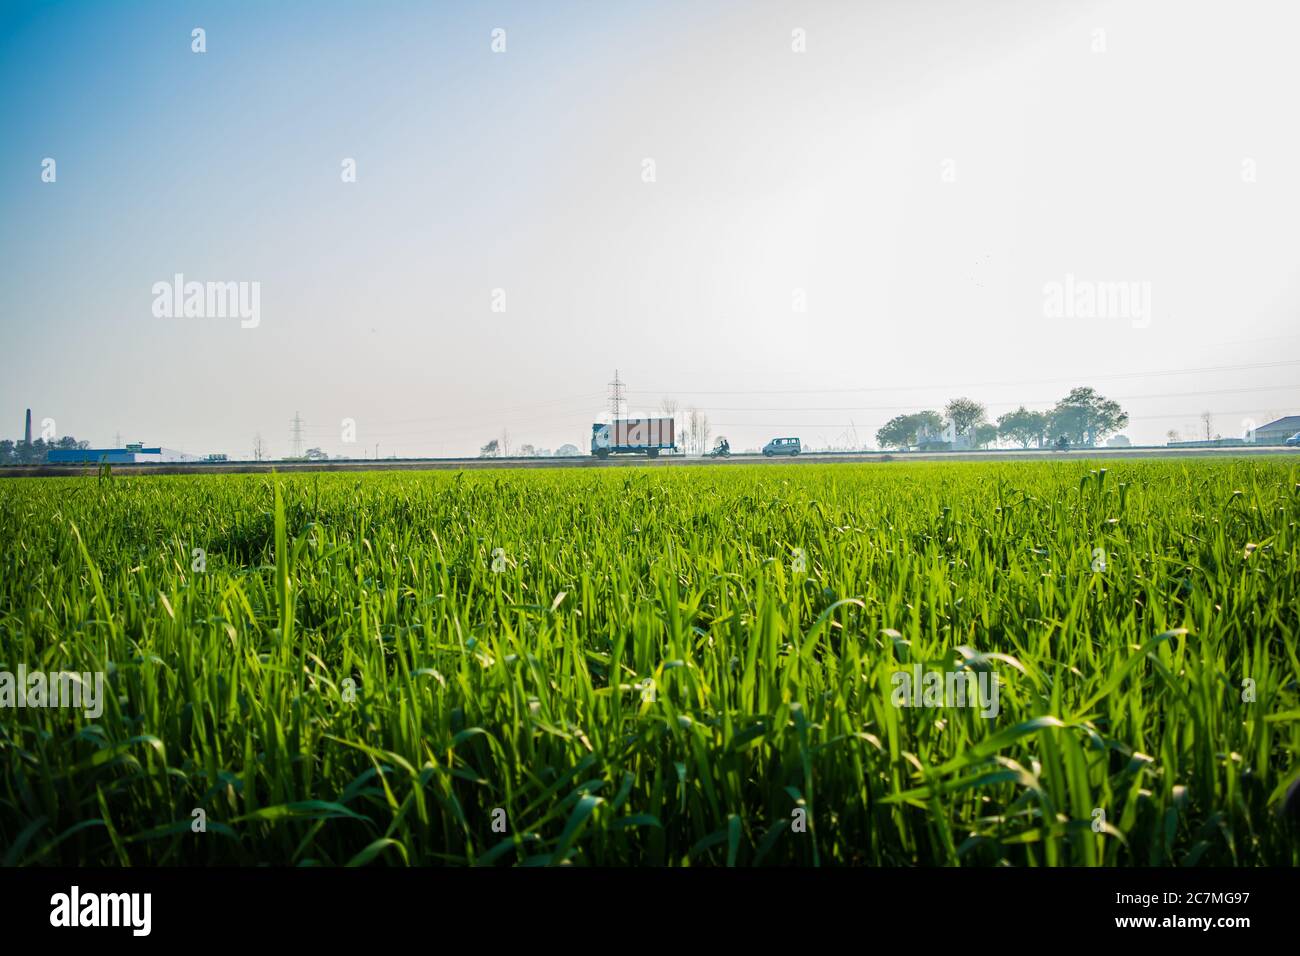 Field of young wheat, Green wheat field with clouds in India, agricultural field landscape Stock Photo